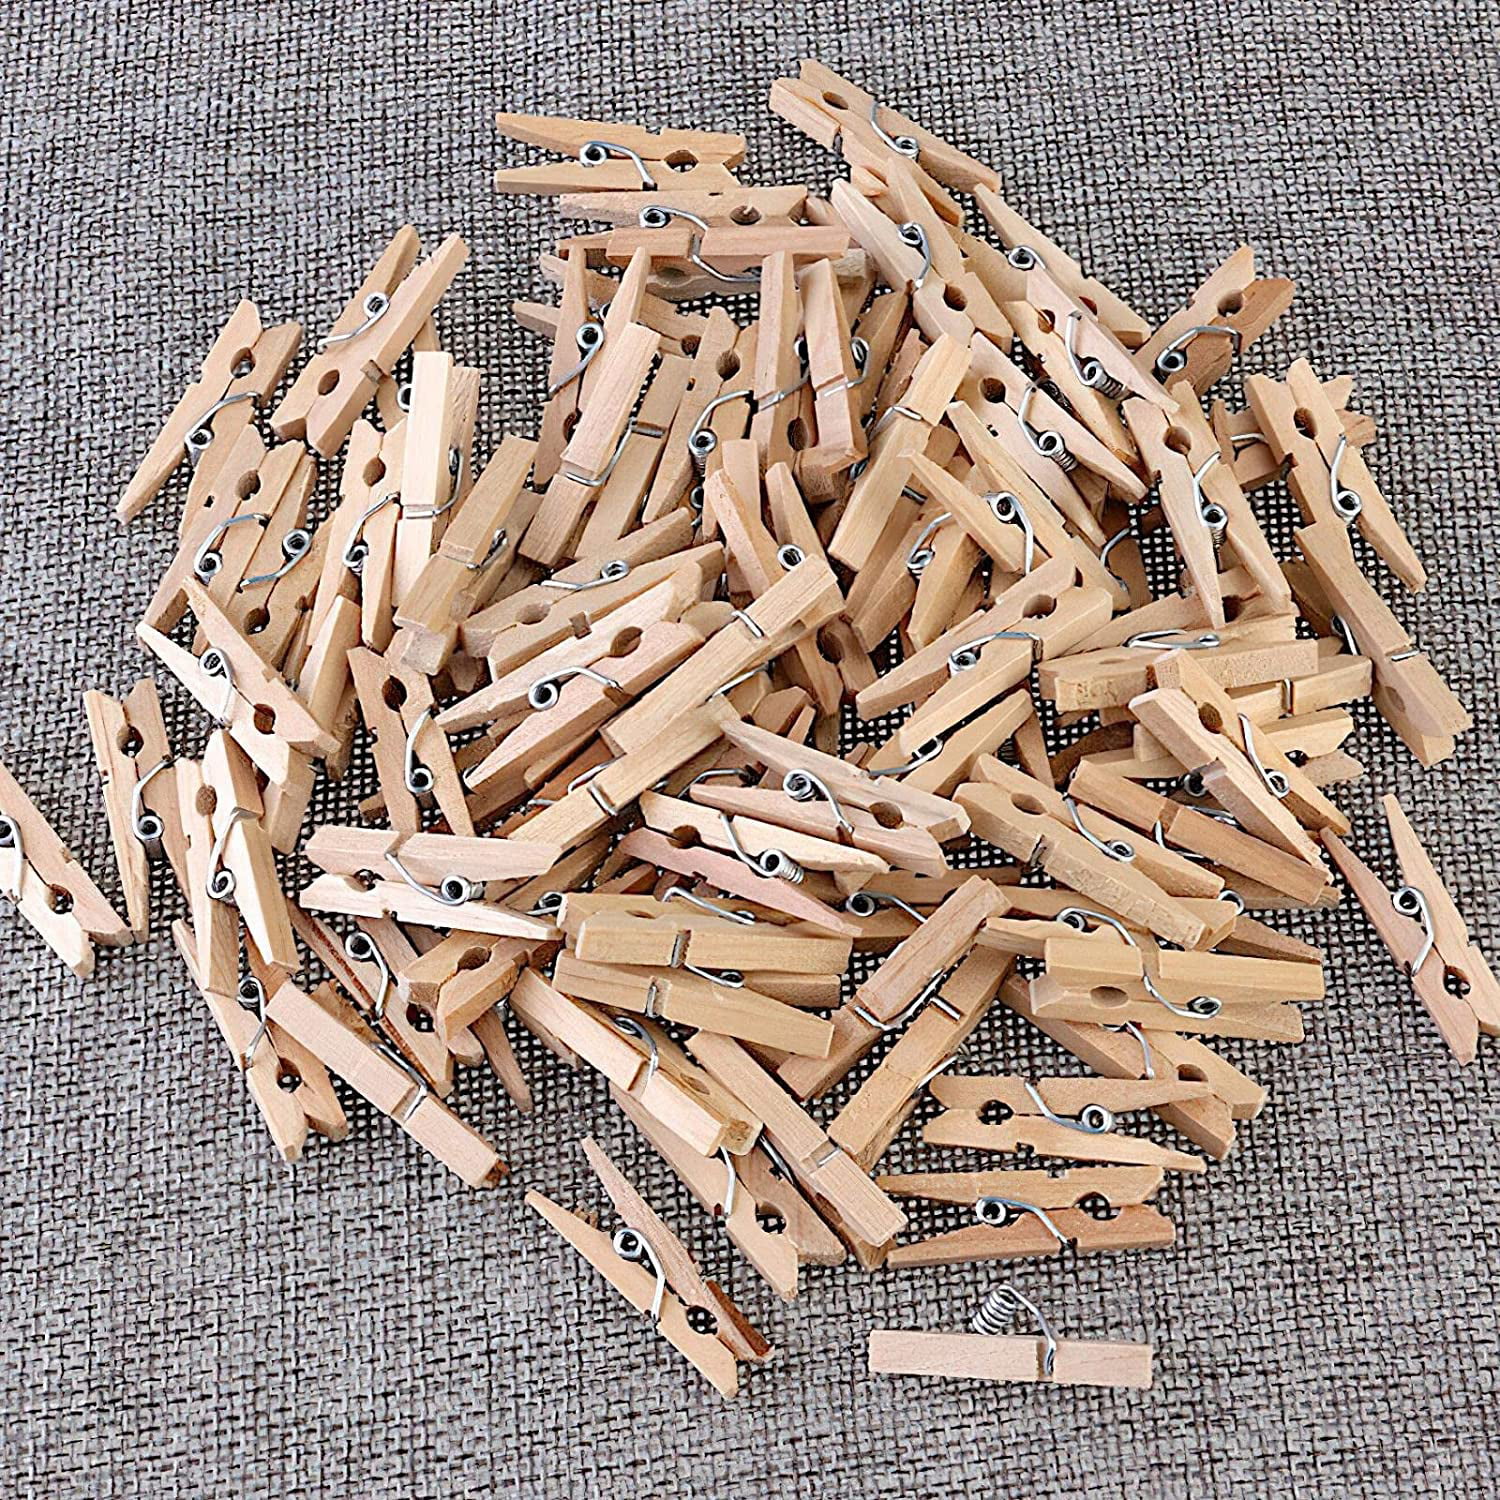 100PCS Mini Wooden Clothespins Clothing Photo Pegs Wooden Clips Holder Hanger us 